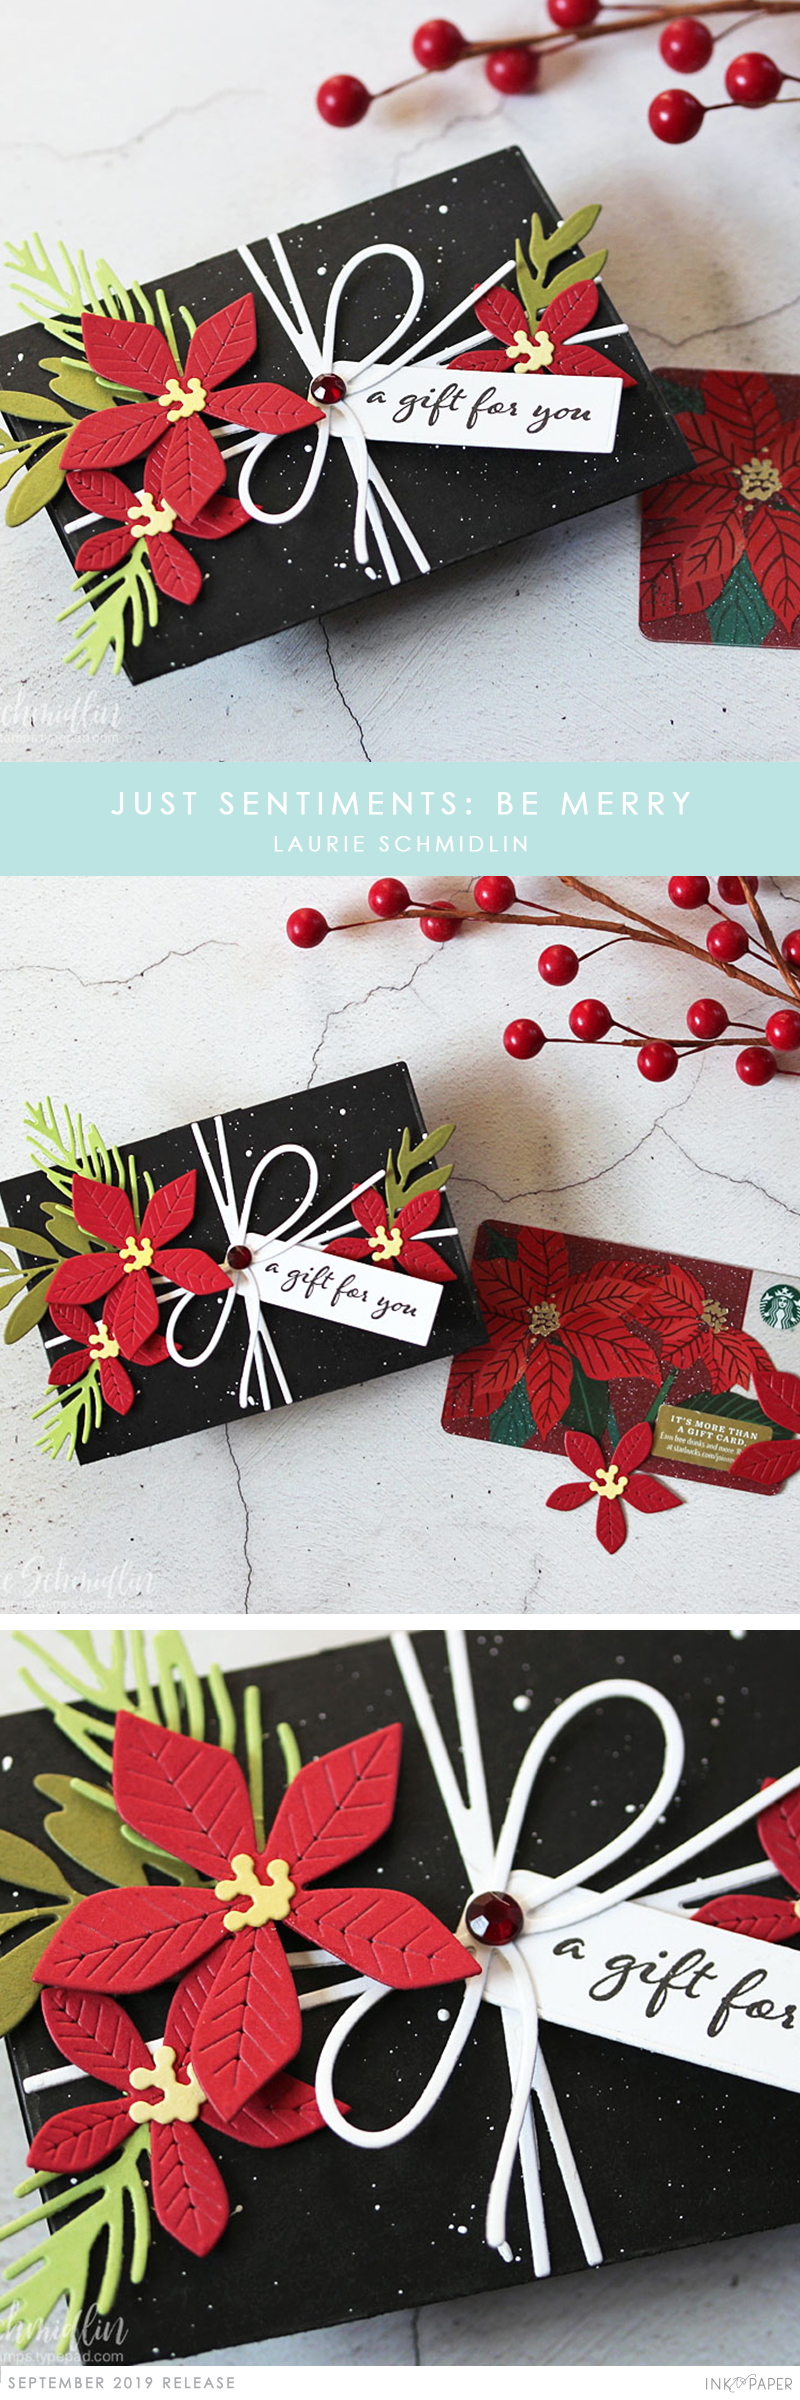 Simply Sweet: Blessed + Just Sentiments: Be Merry + Tag Creations: Modern  Gift